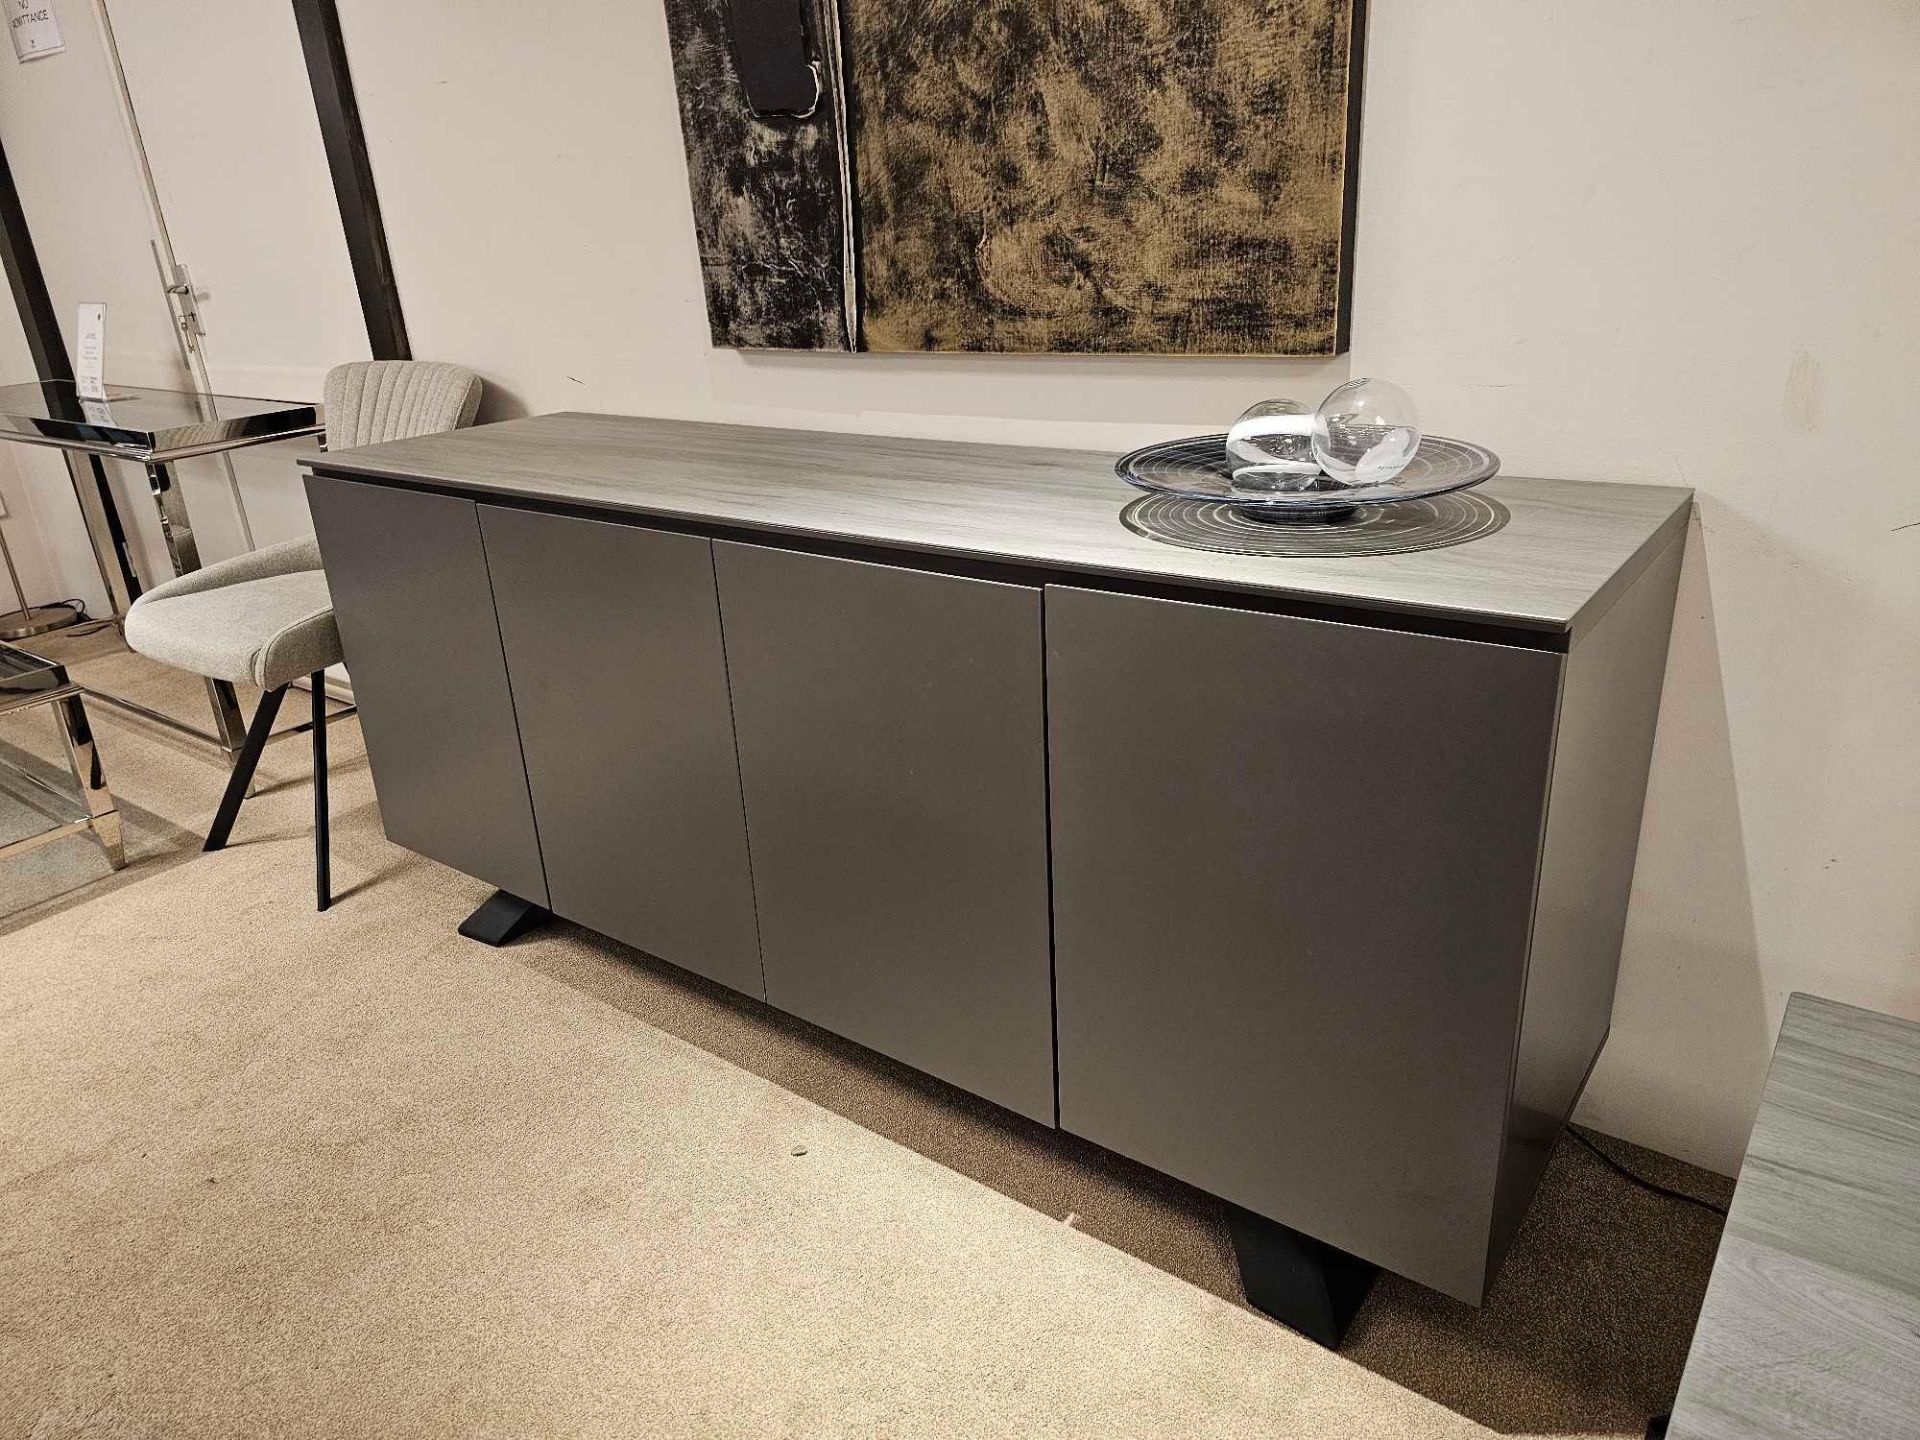 Spartan Sideboard by Kesterport The Spartan Four Door Sideboard provides is striking as a stand - Image 3 of 8